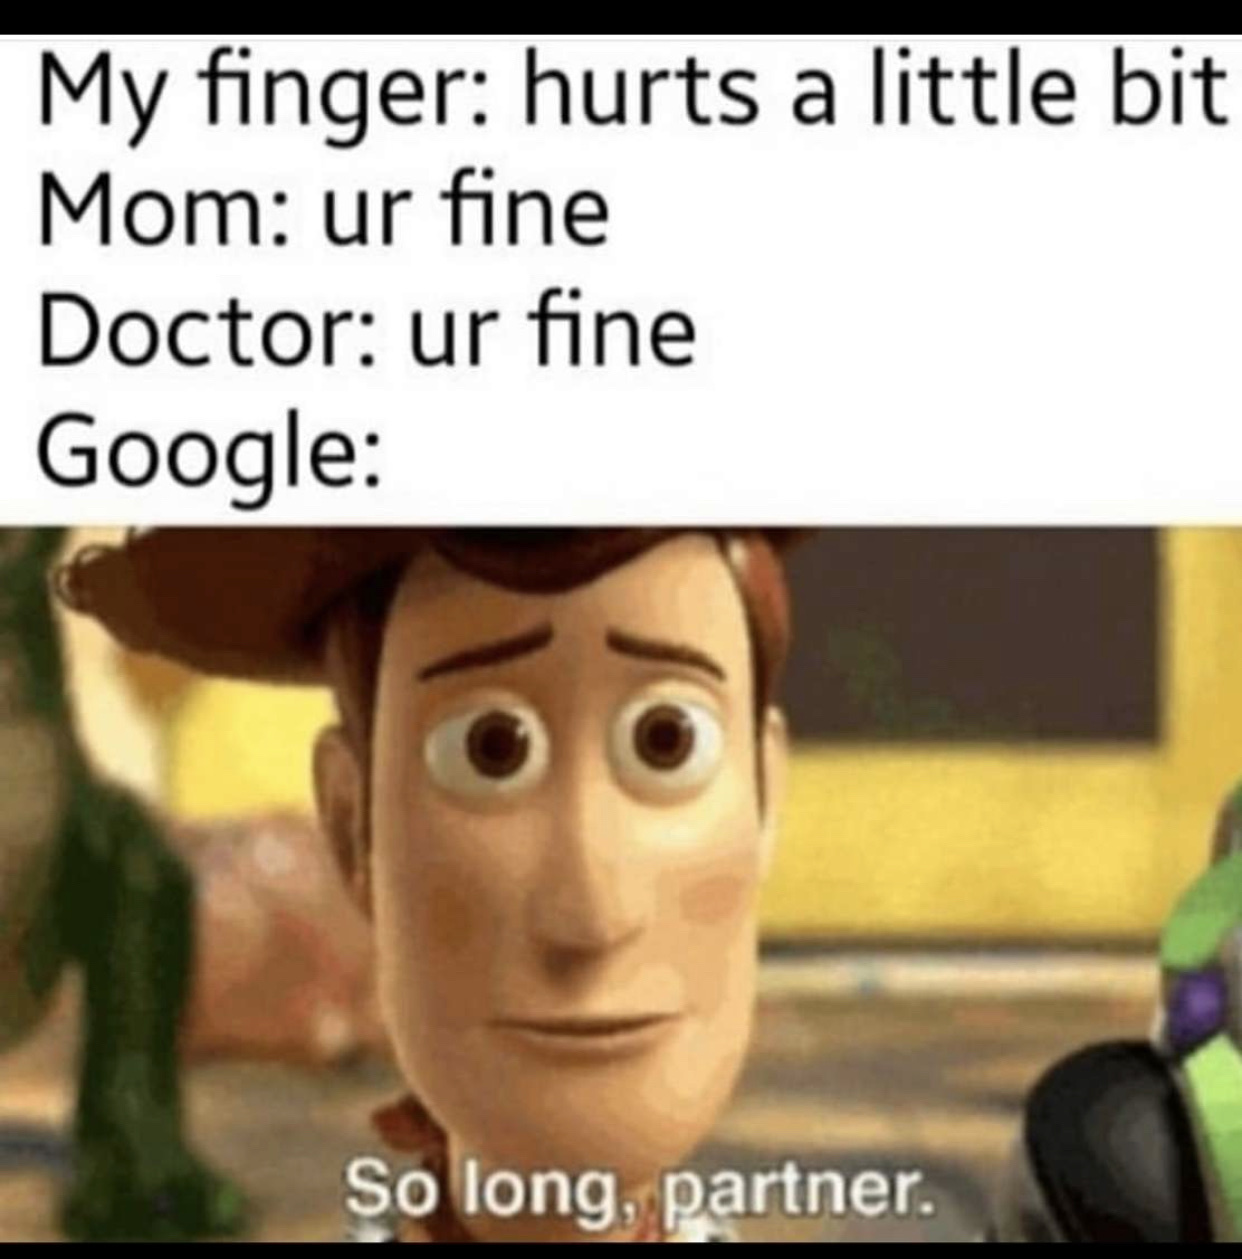 when you accidentally hurt your finger - meme